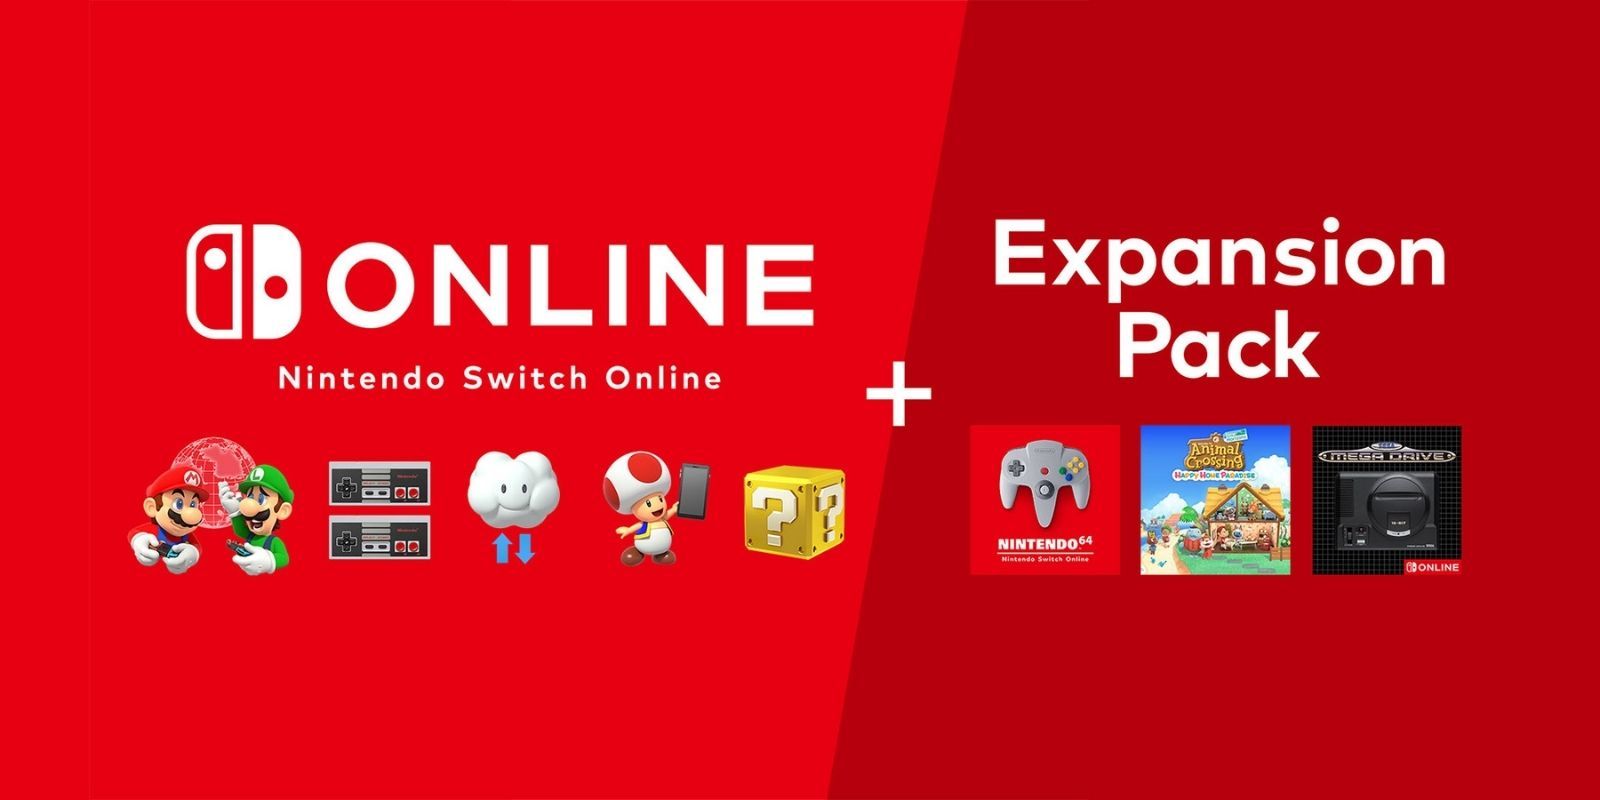 The key art for the Switch Online Expansion Pack